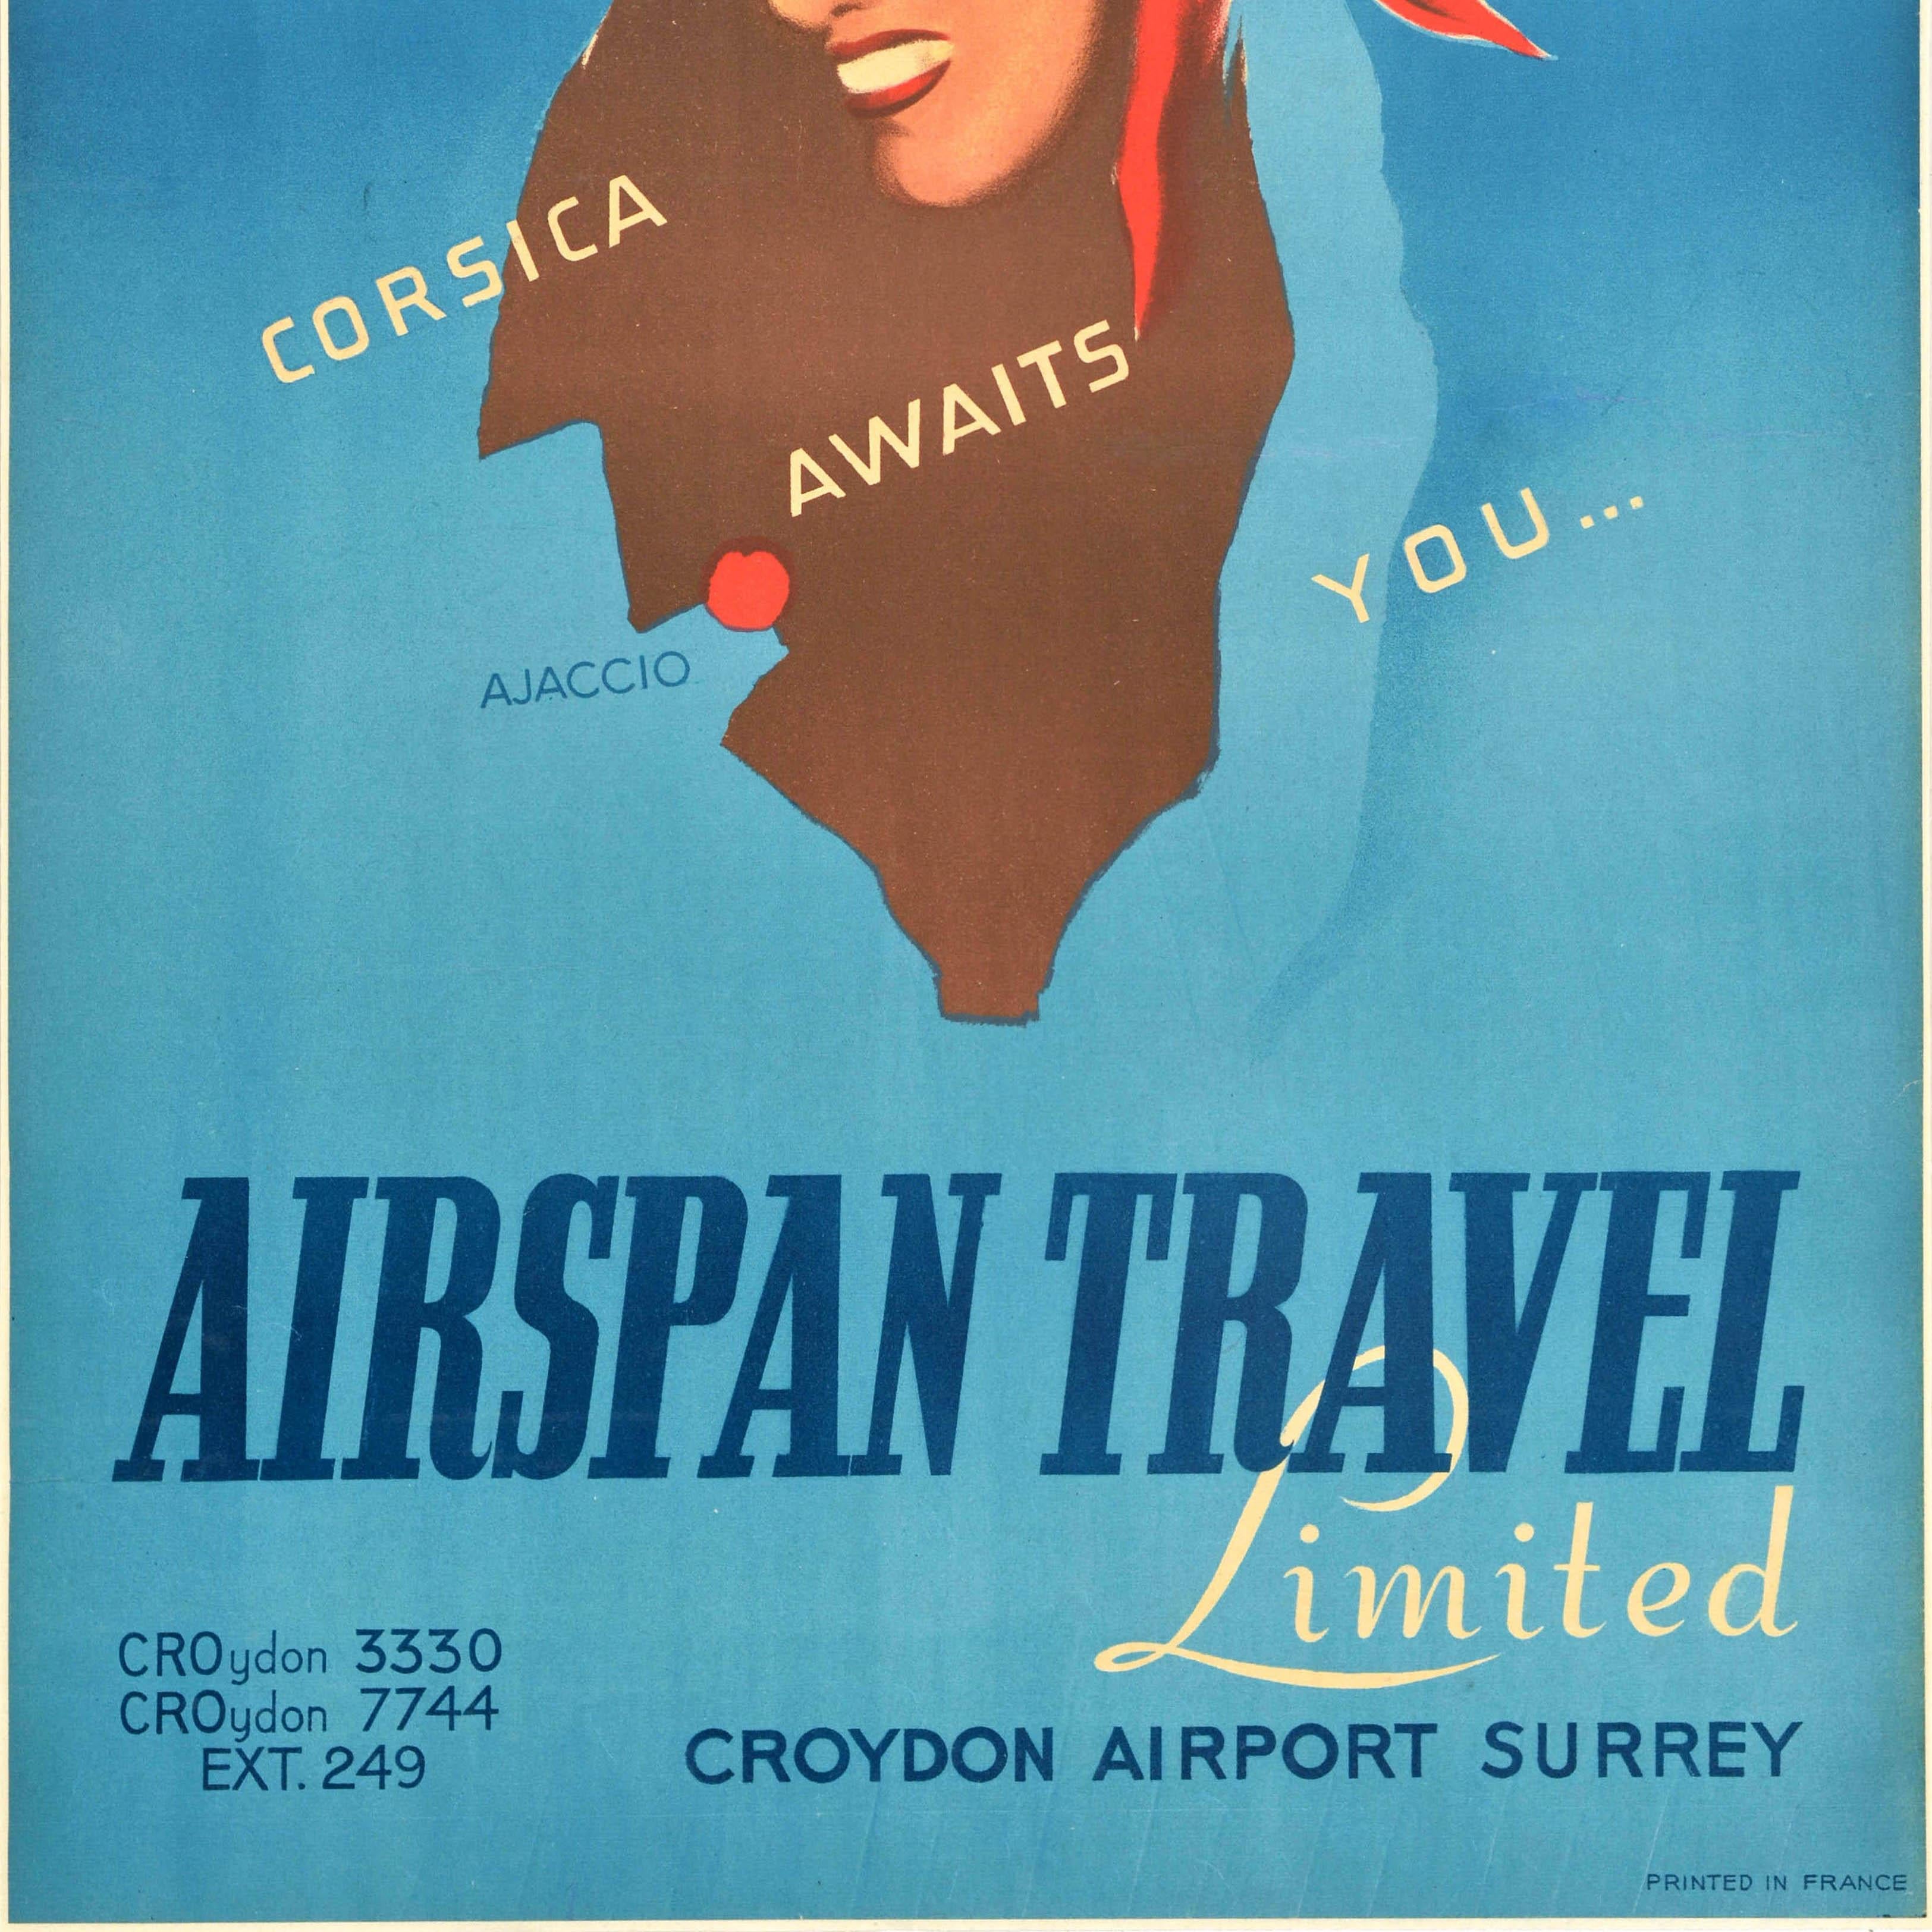 Original vintage travel advertising poster for Airspan Travel Limited Corsica Awaits You... featuring an image of a plane flying above a map of Corsica island with a smiling lady in a red headscarf and Ajaccio marked on the map set against a blue